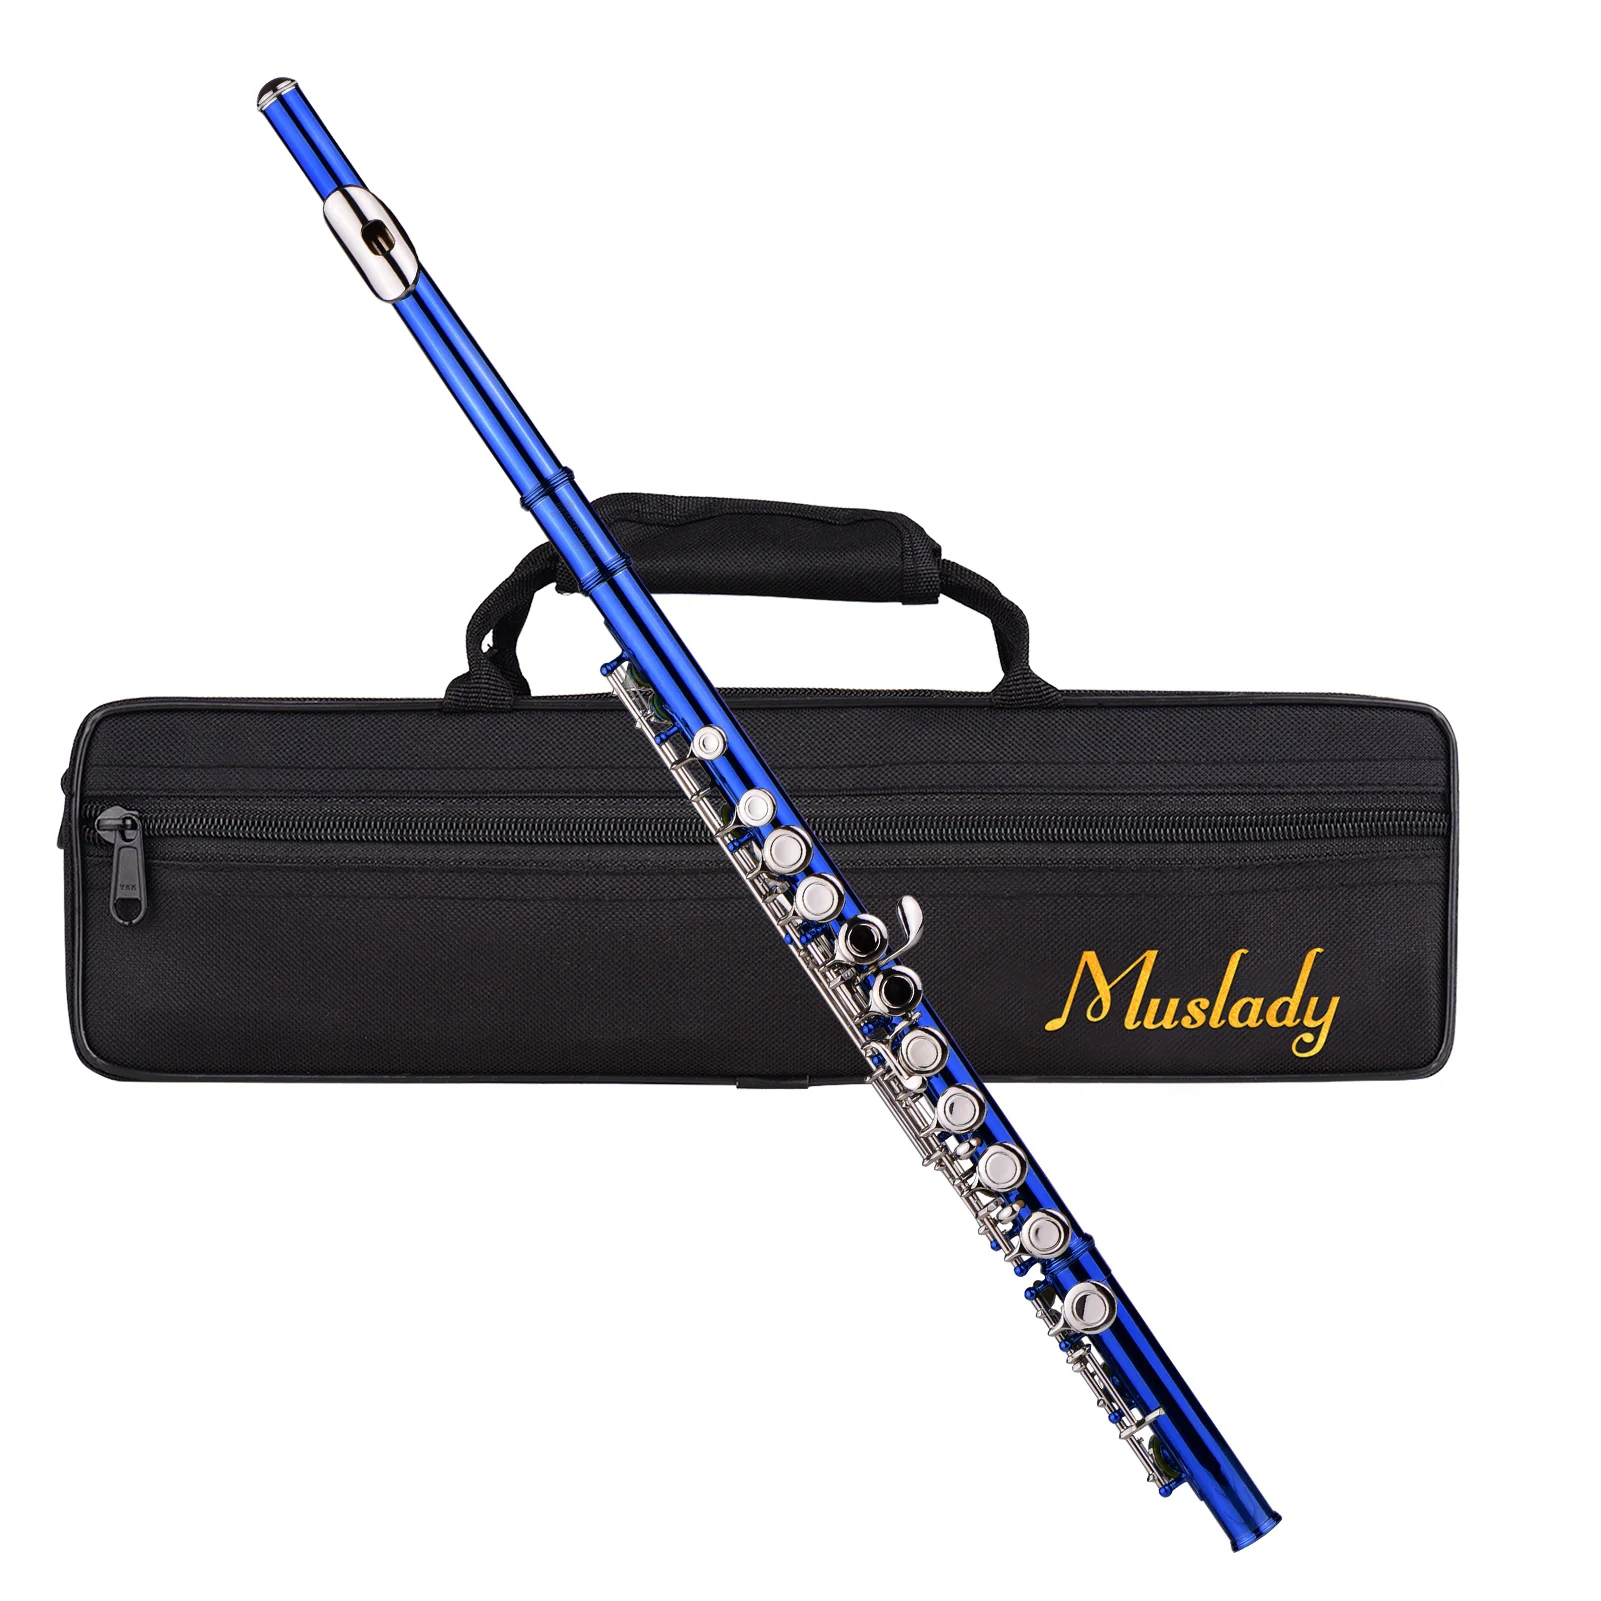 Muslady Closed Hole C Flute 16 Keys Wind Instrument with Carry Case Flute Stand Cleaning Cloth Mini Screwdriver Cleaning Rod